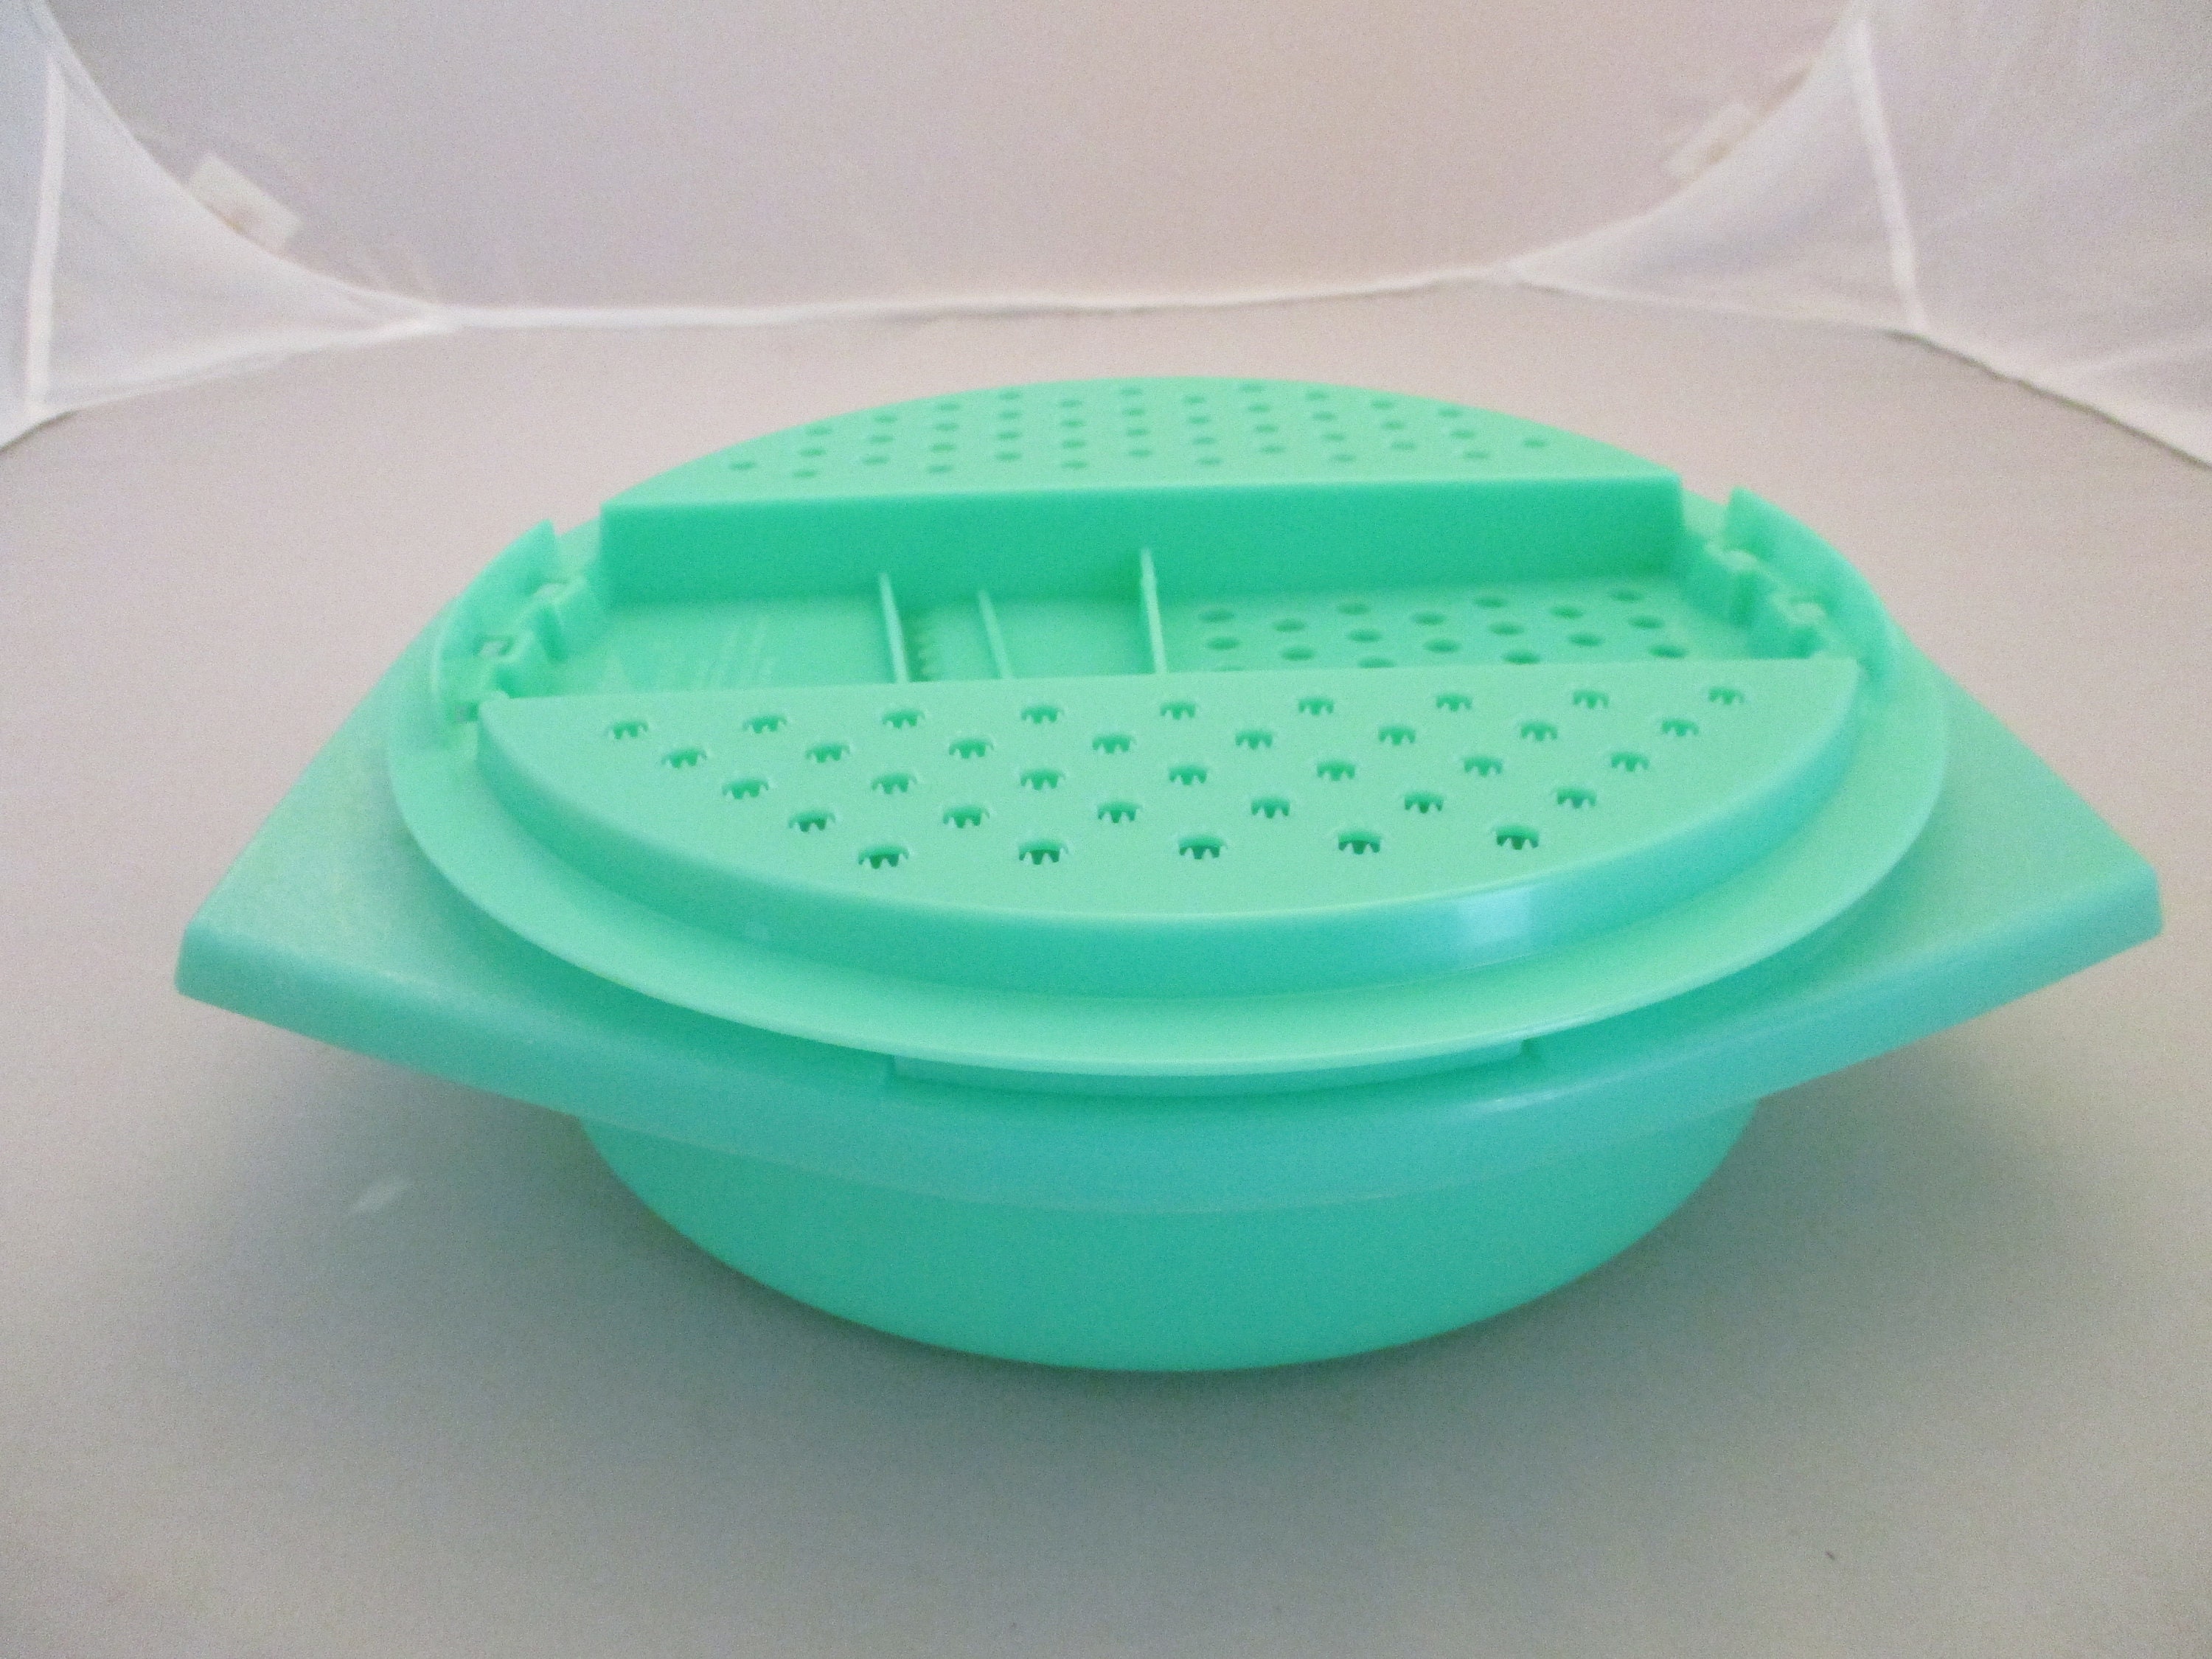 Tupperware Green Cheese Grater Slicer with Bowl 787-6 and 786-7 Vintage